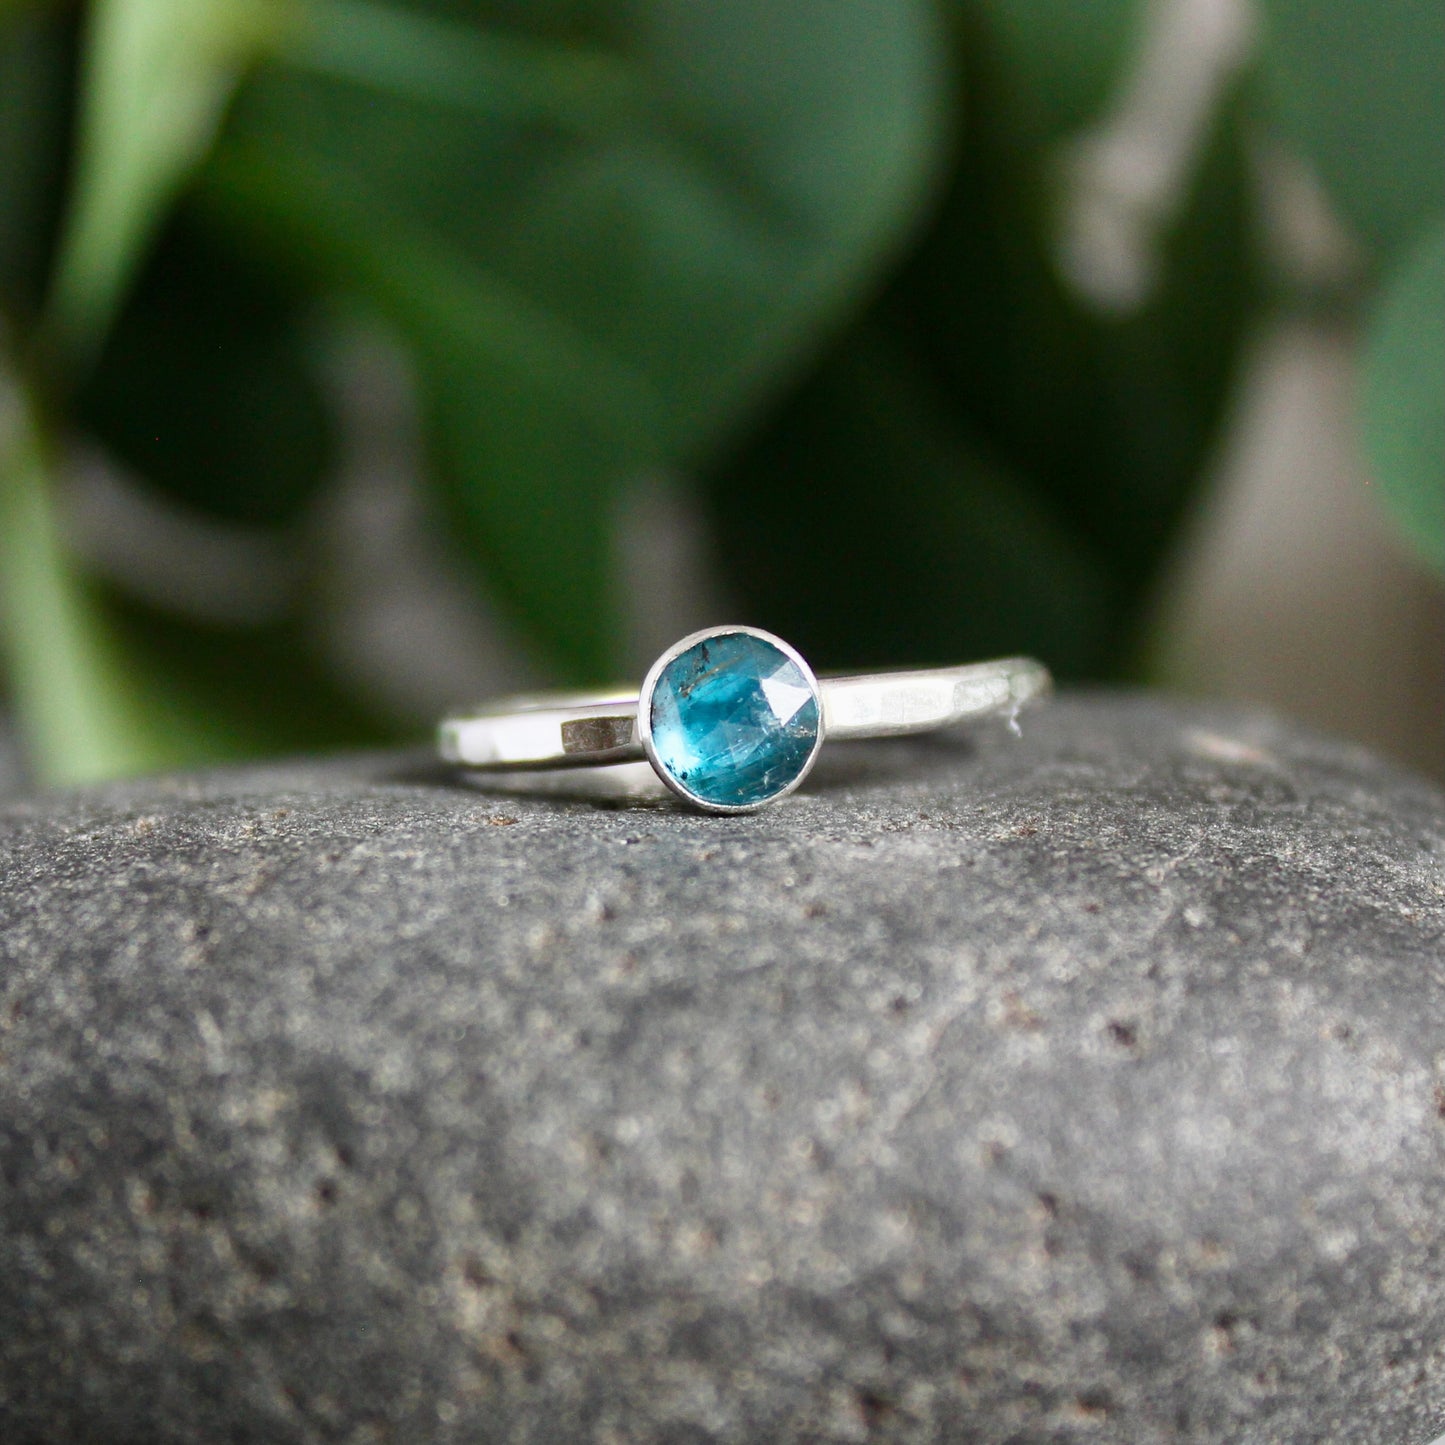 6mm rose cut teal moss kyanite set in a sterling silver bezel setting on a sturdy silver band. 